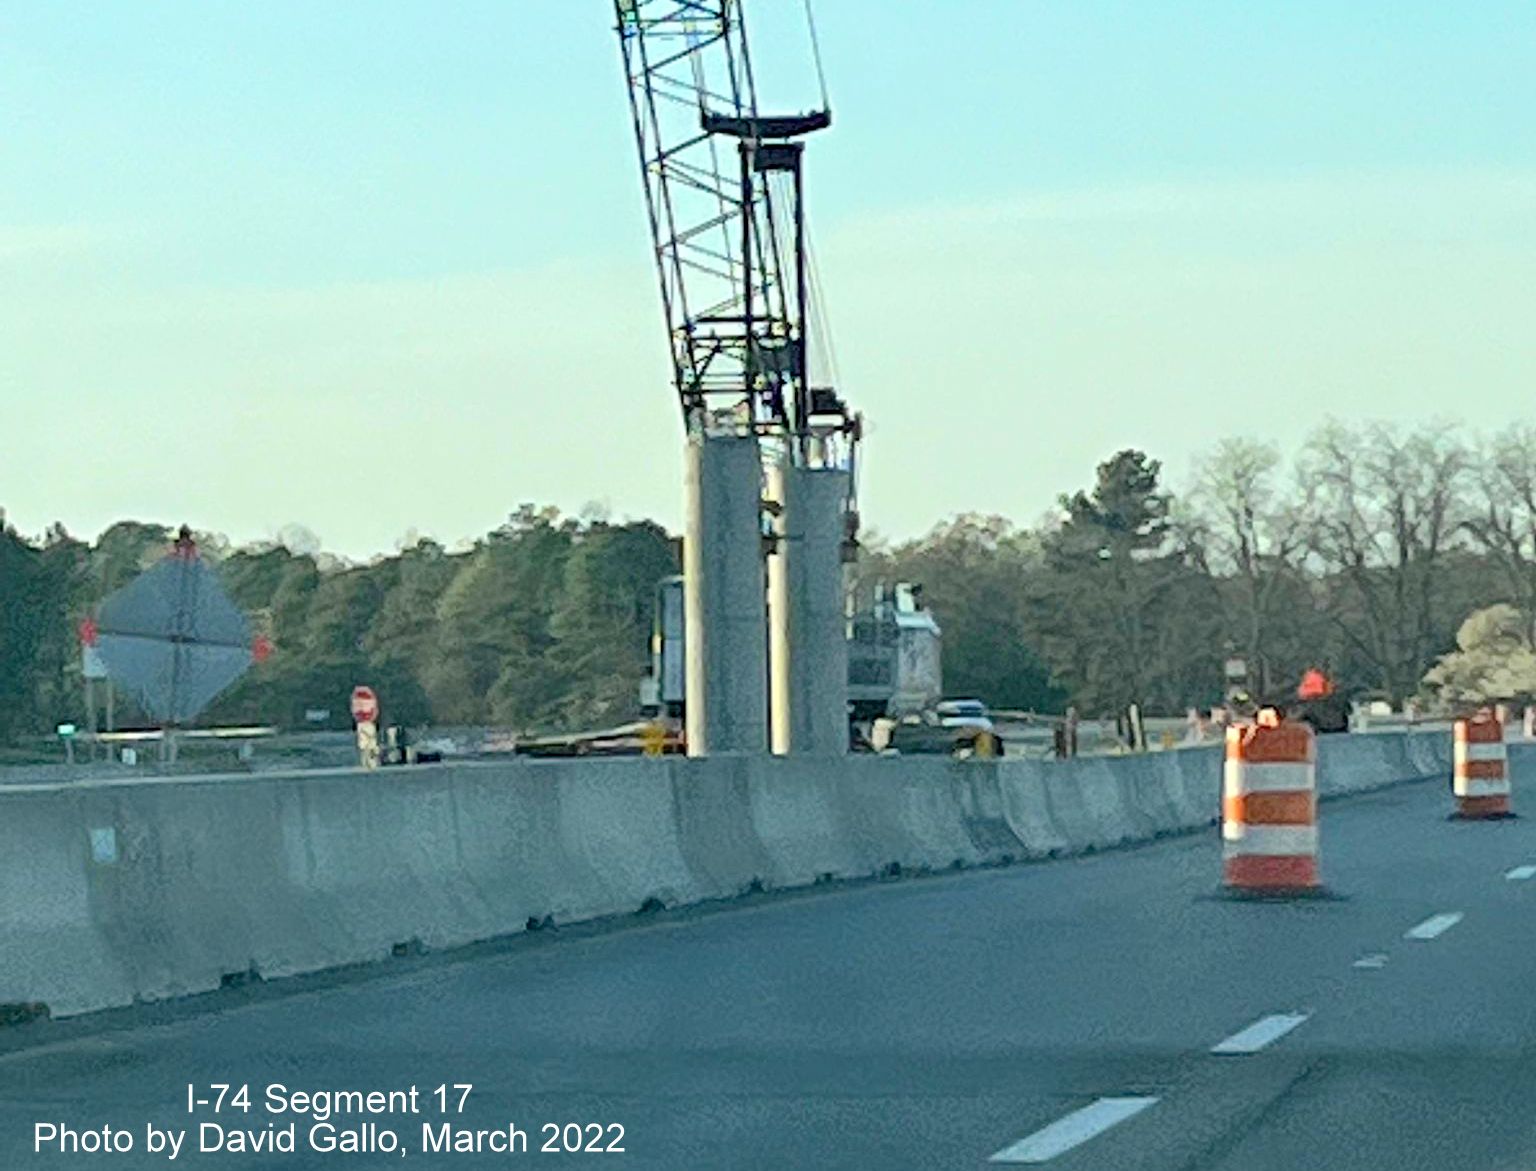 Image of crane helping construct supports for future Boardman interchange bridge on US 74 (Future I-74) West
        , by David Gallo, March 2022